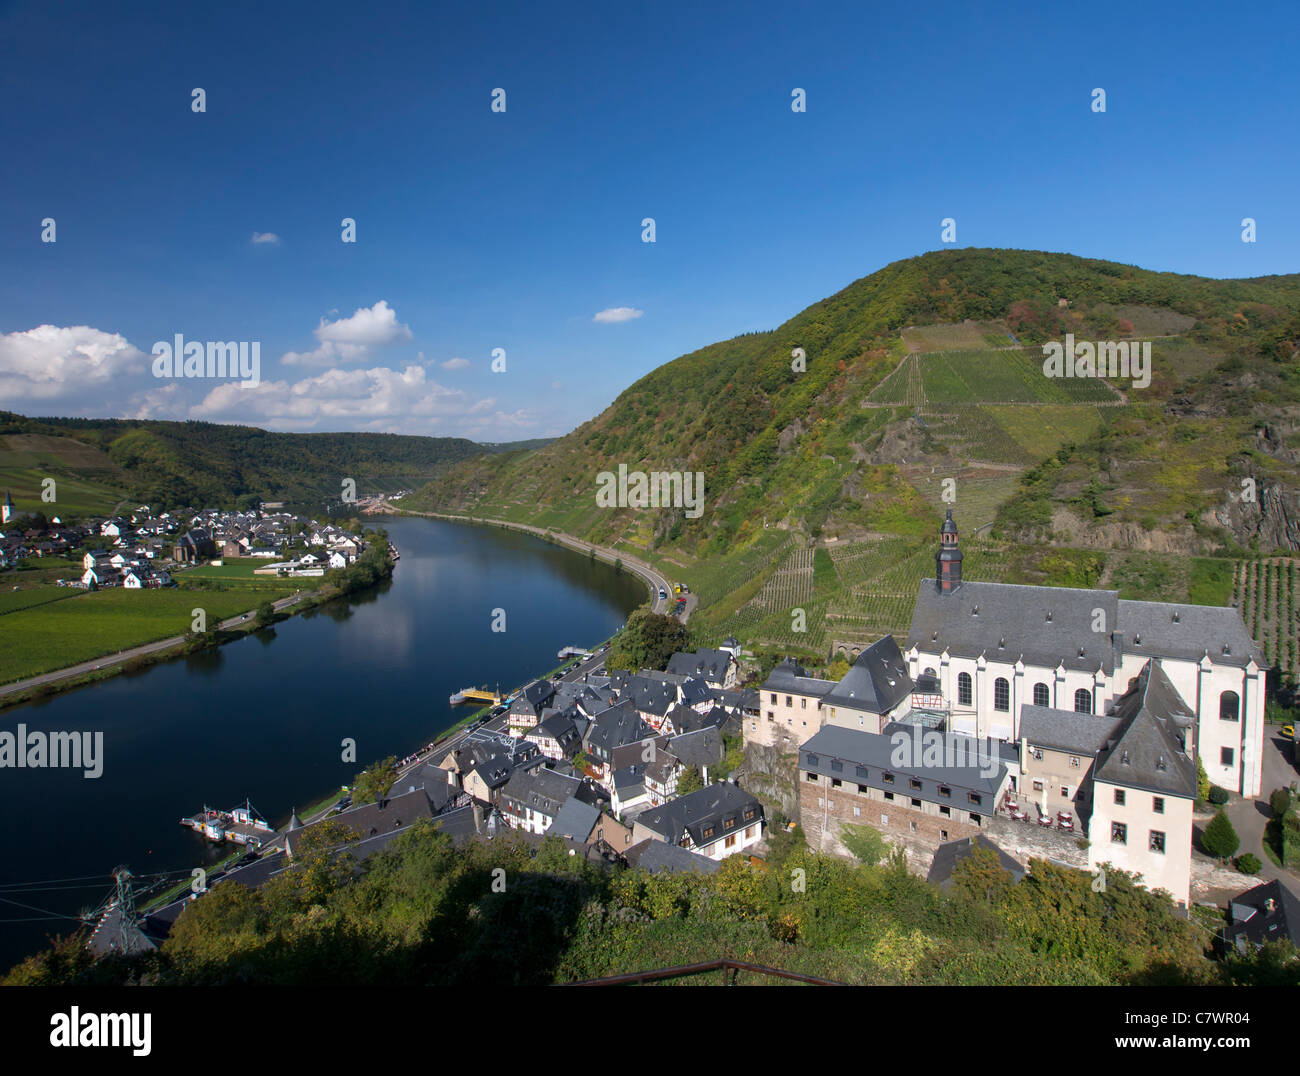 View of historic village of Beilstein and Mosel River in Mosel Valley Rhineland Germany Stock Photo